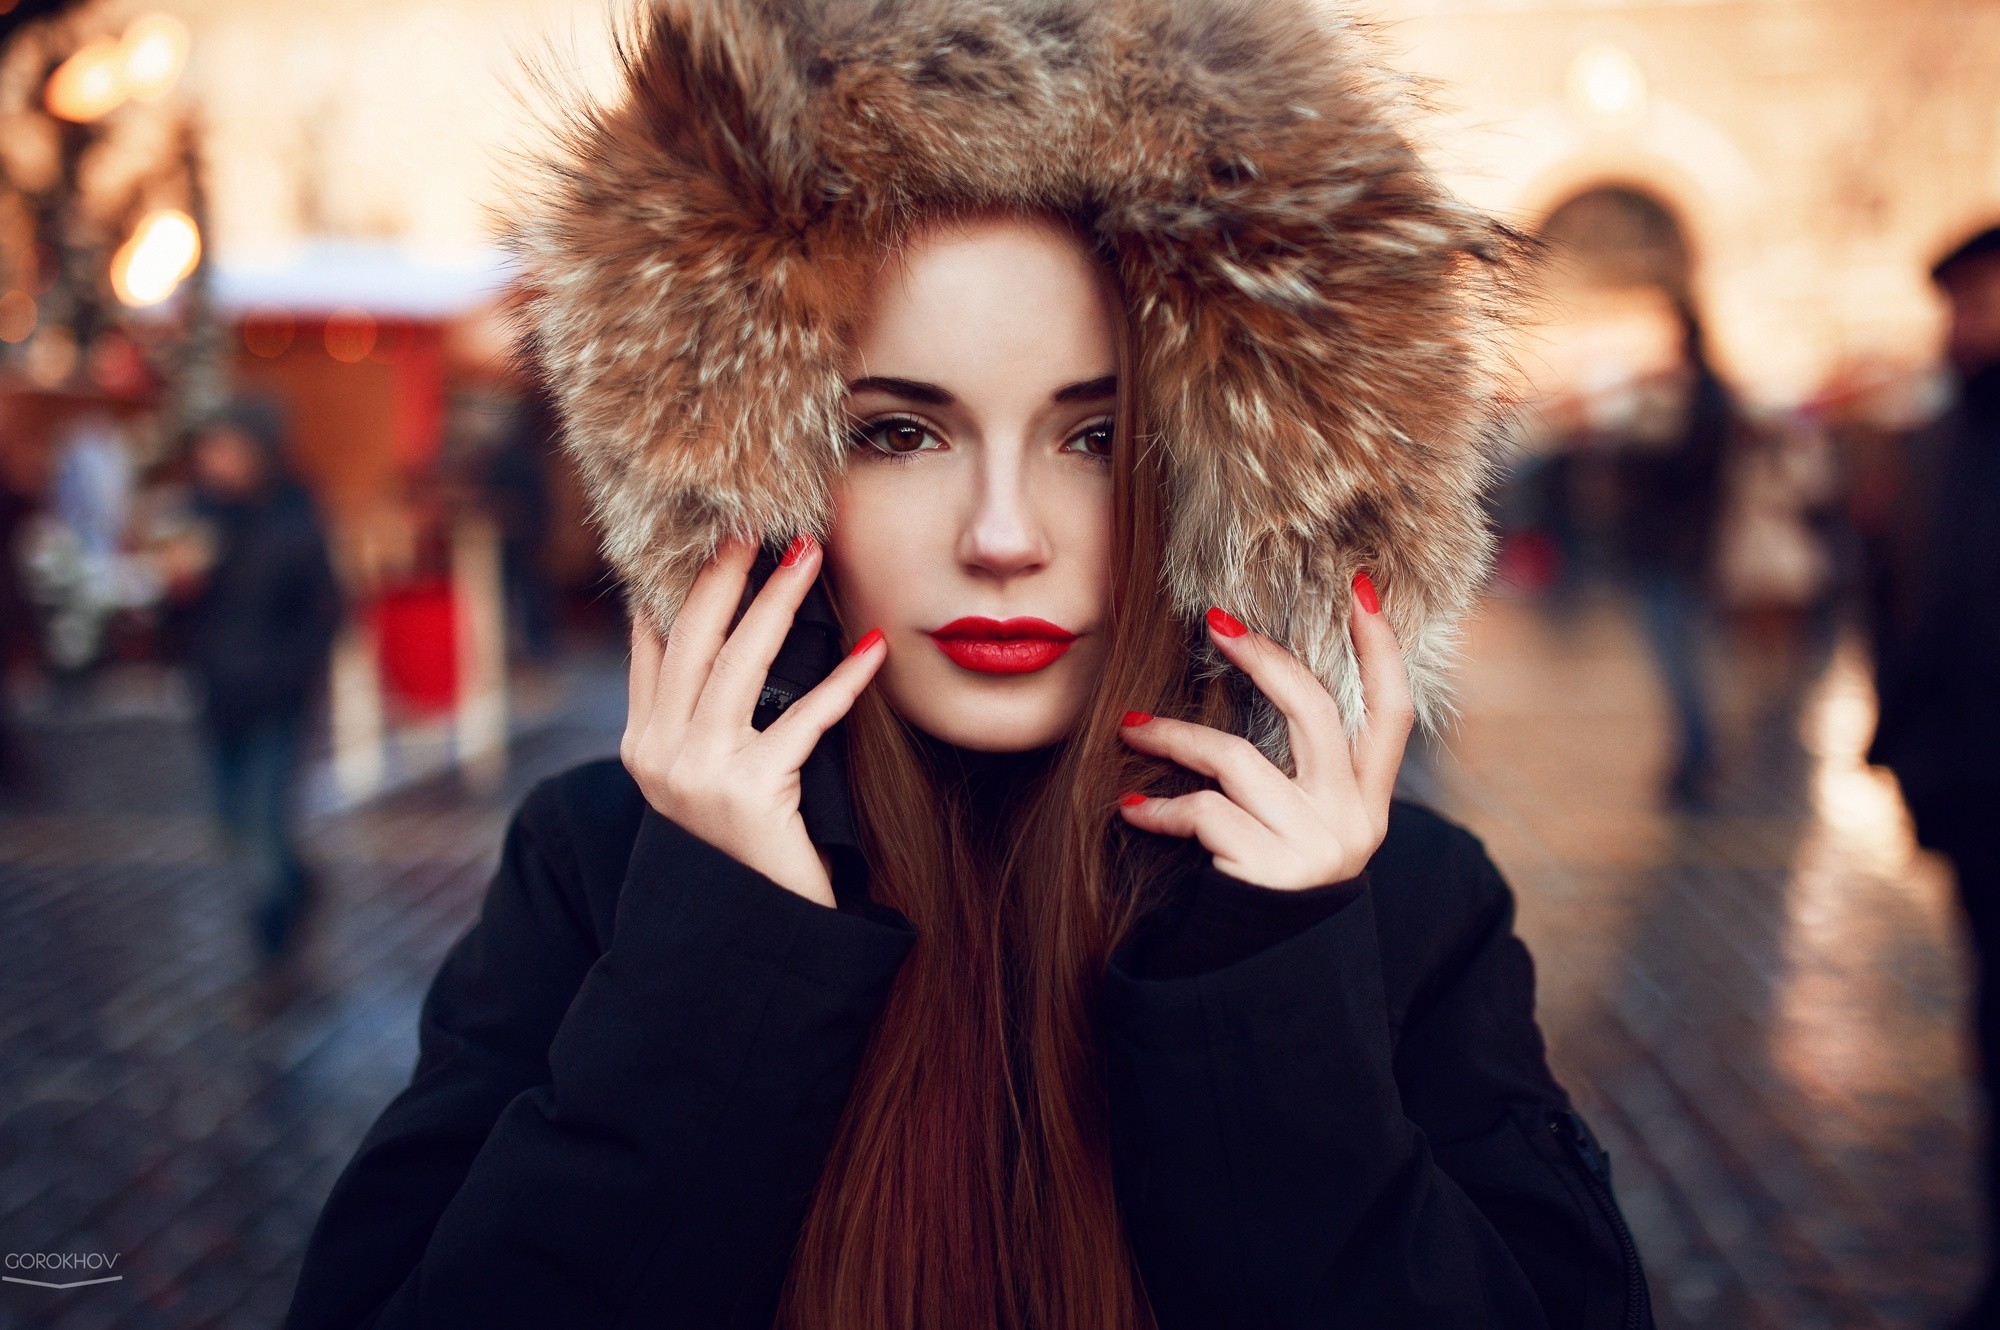 People 2000x1330 women model face red lipstick red nails fashion women outdoors airbrushed Sasha Spilberg Ivan Gorokhov coats black jackets brown eyes makeup closed mouth brunette 500px painted nails young women